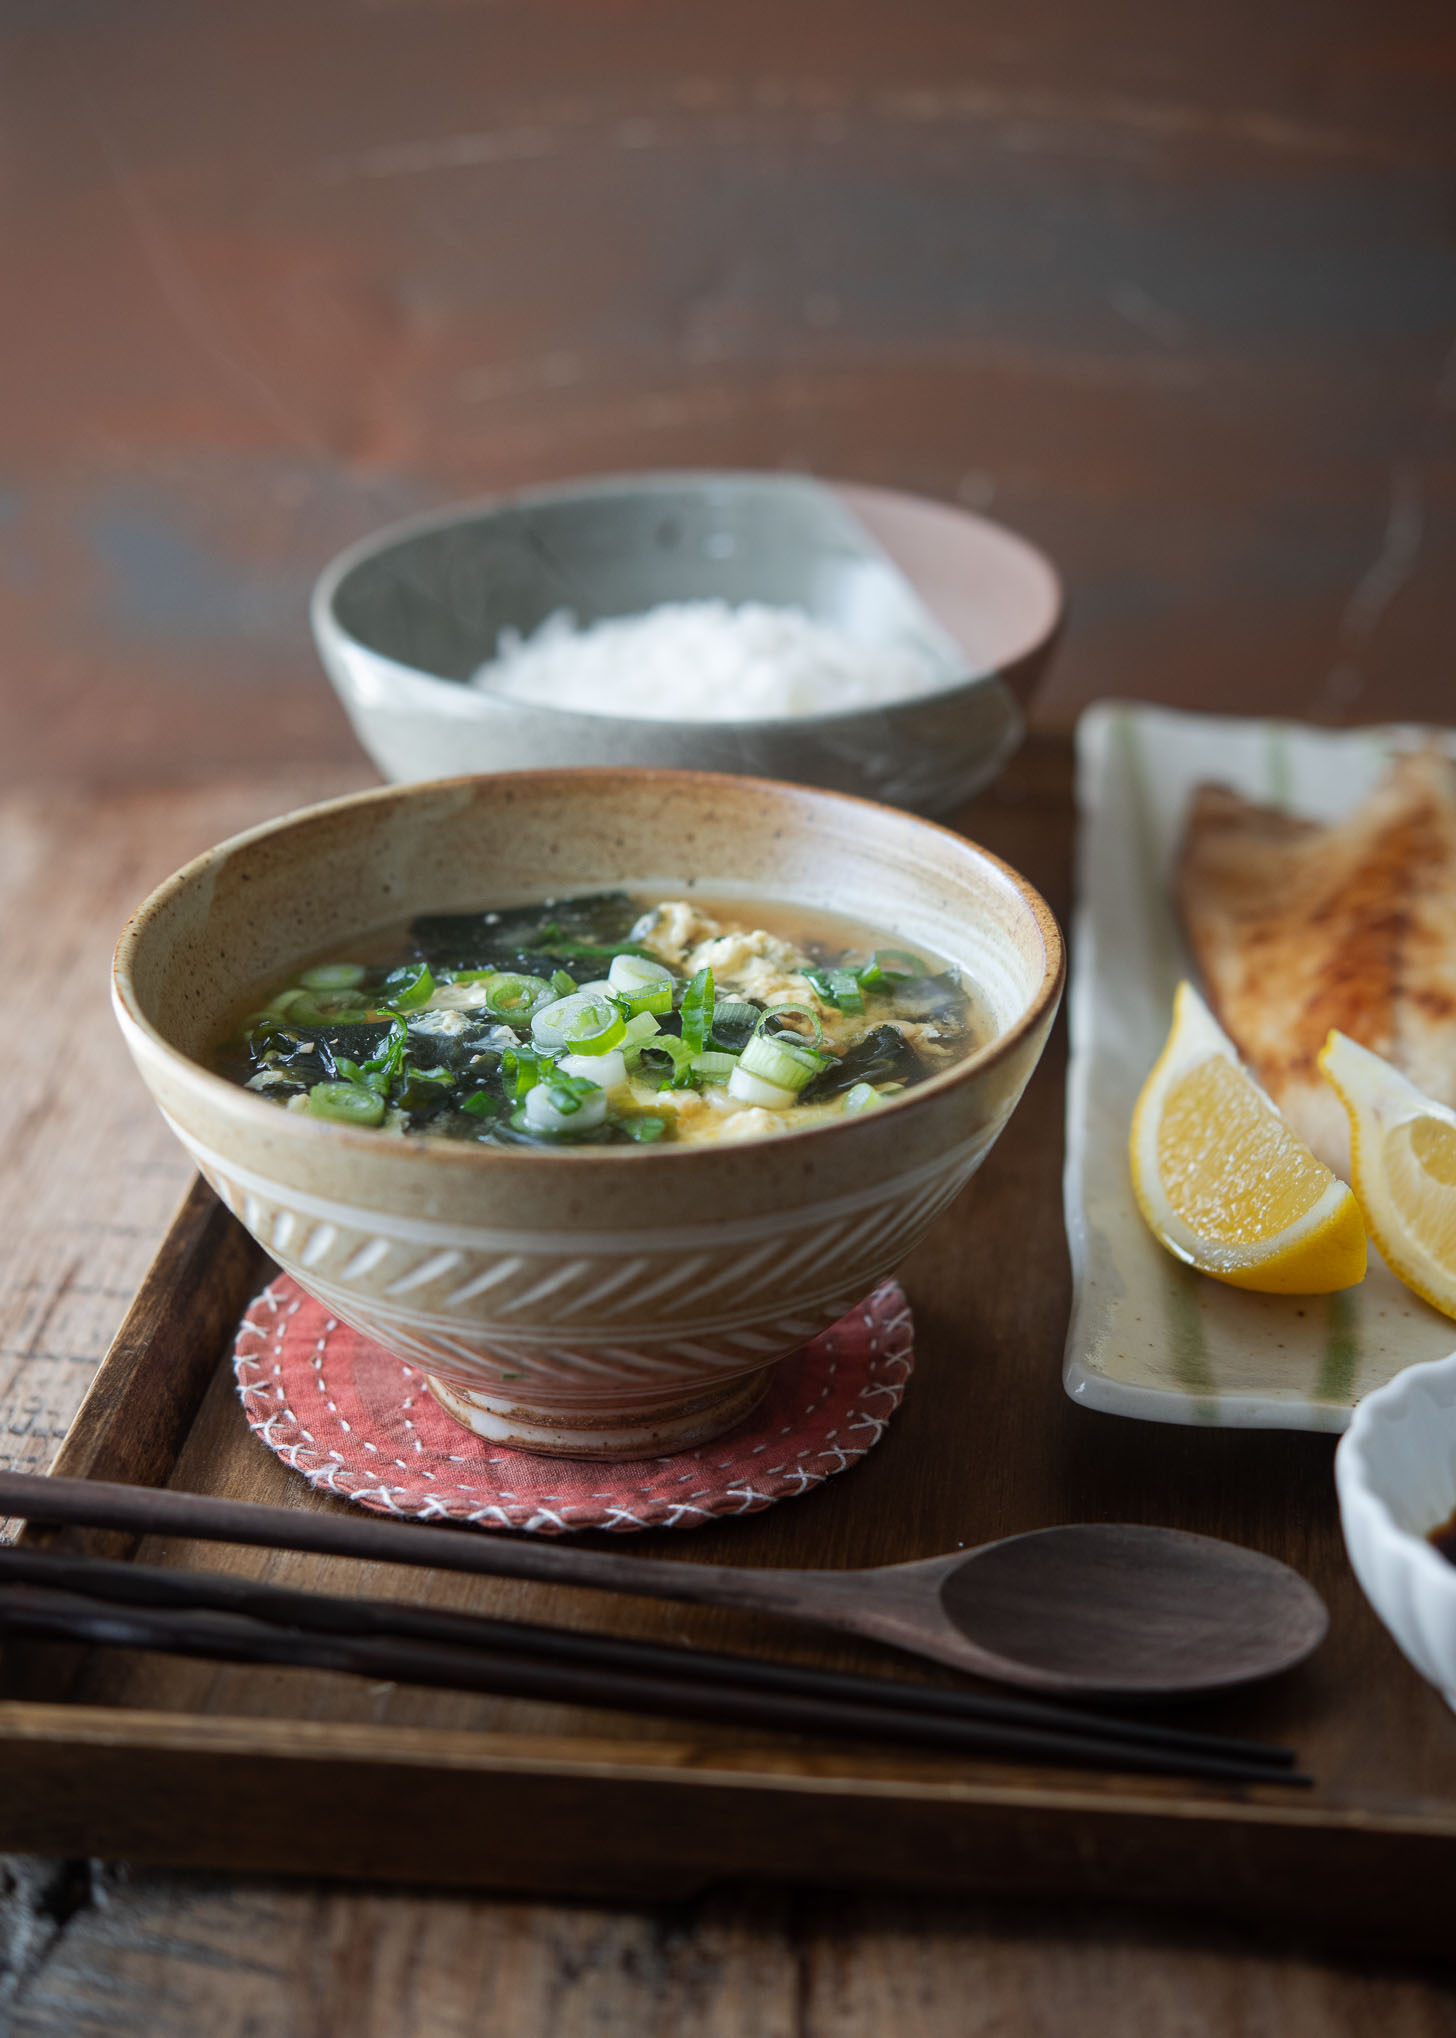 Seaweed egg drop soup is garnished with green onion and served as a breakfast.